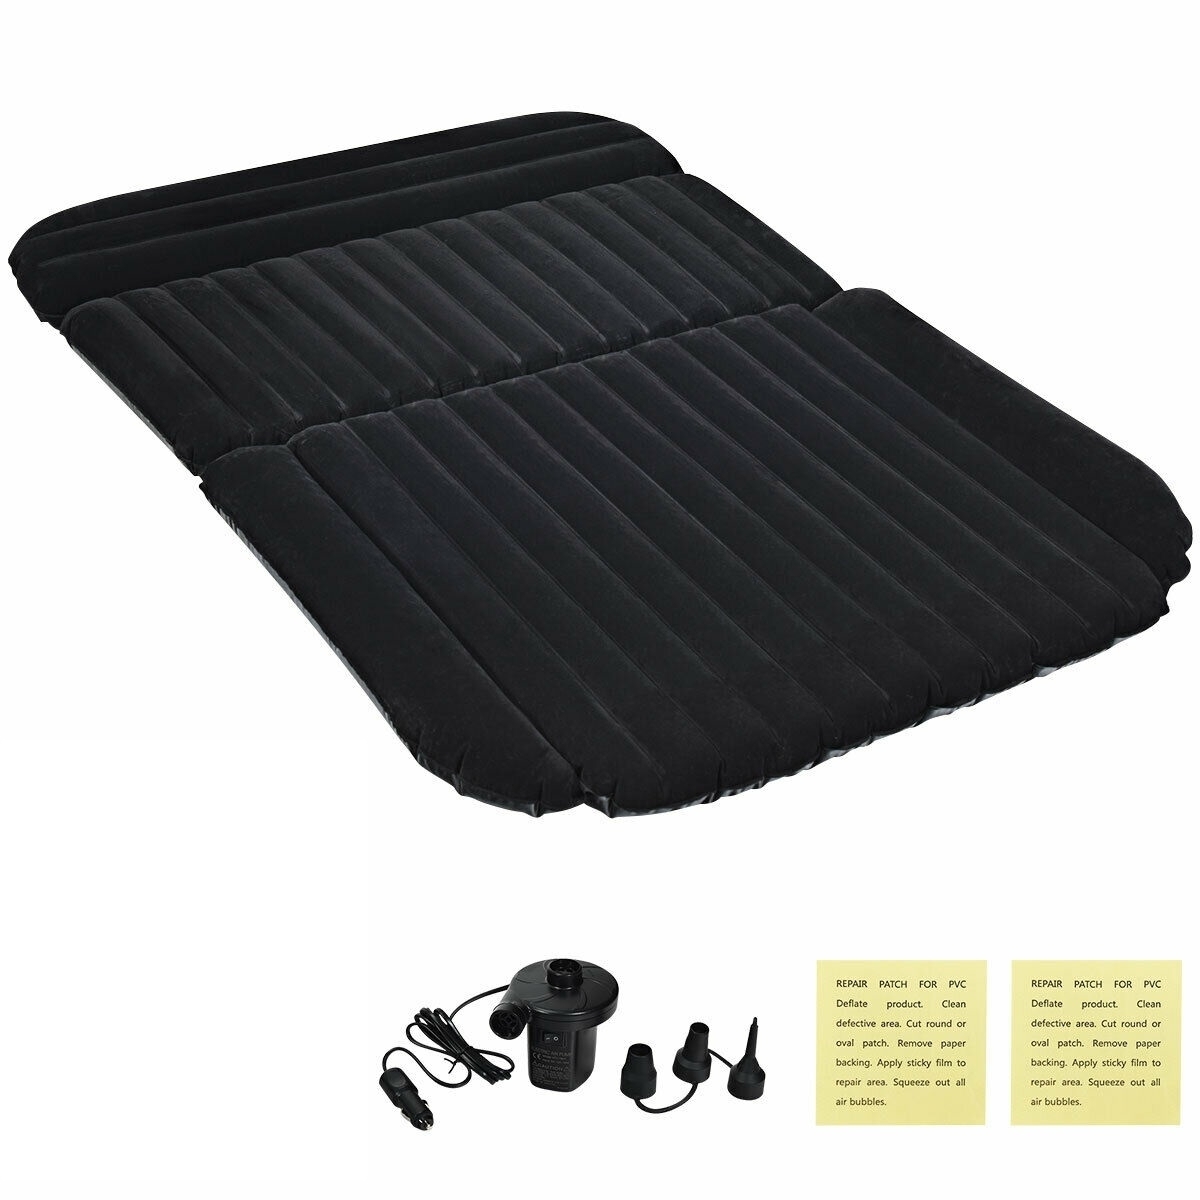 Inflatable SUV Air Backseat Mattress Flocking Travel Pad W/Pump Camping Outdoor